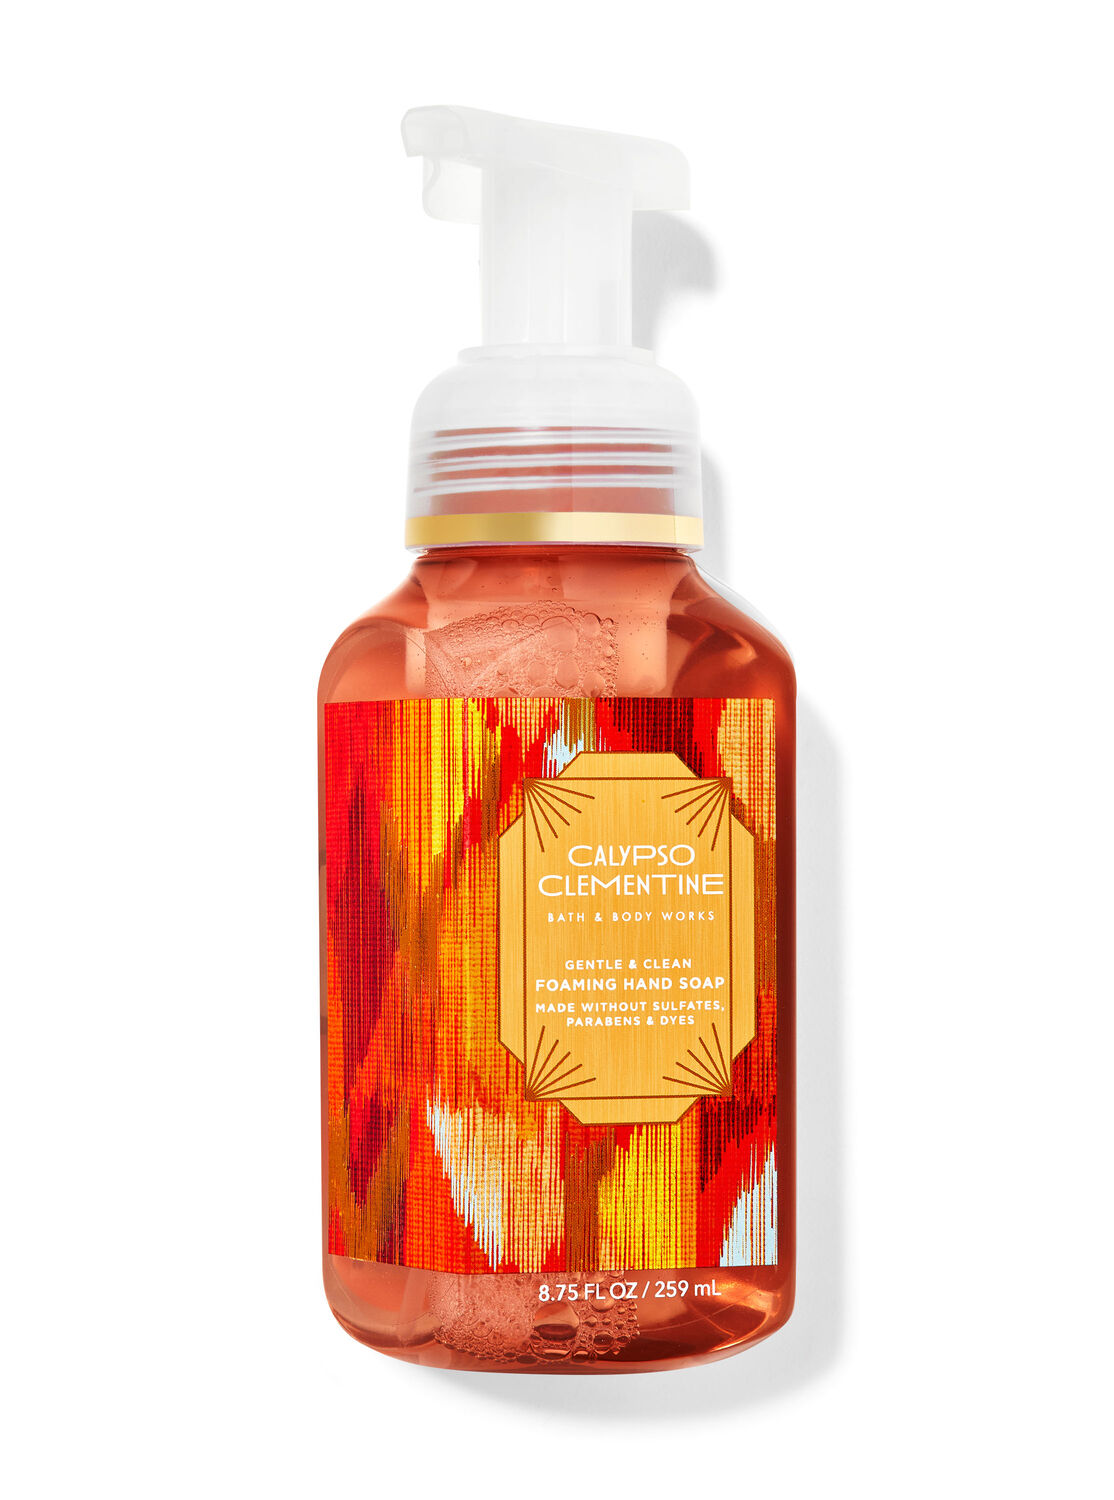 Bath & Body Works FOAMING HAND SOAP Pick Your Scent FREE SHIP New